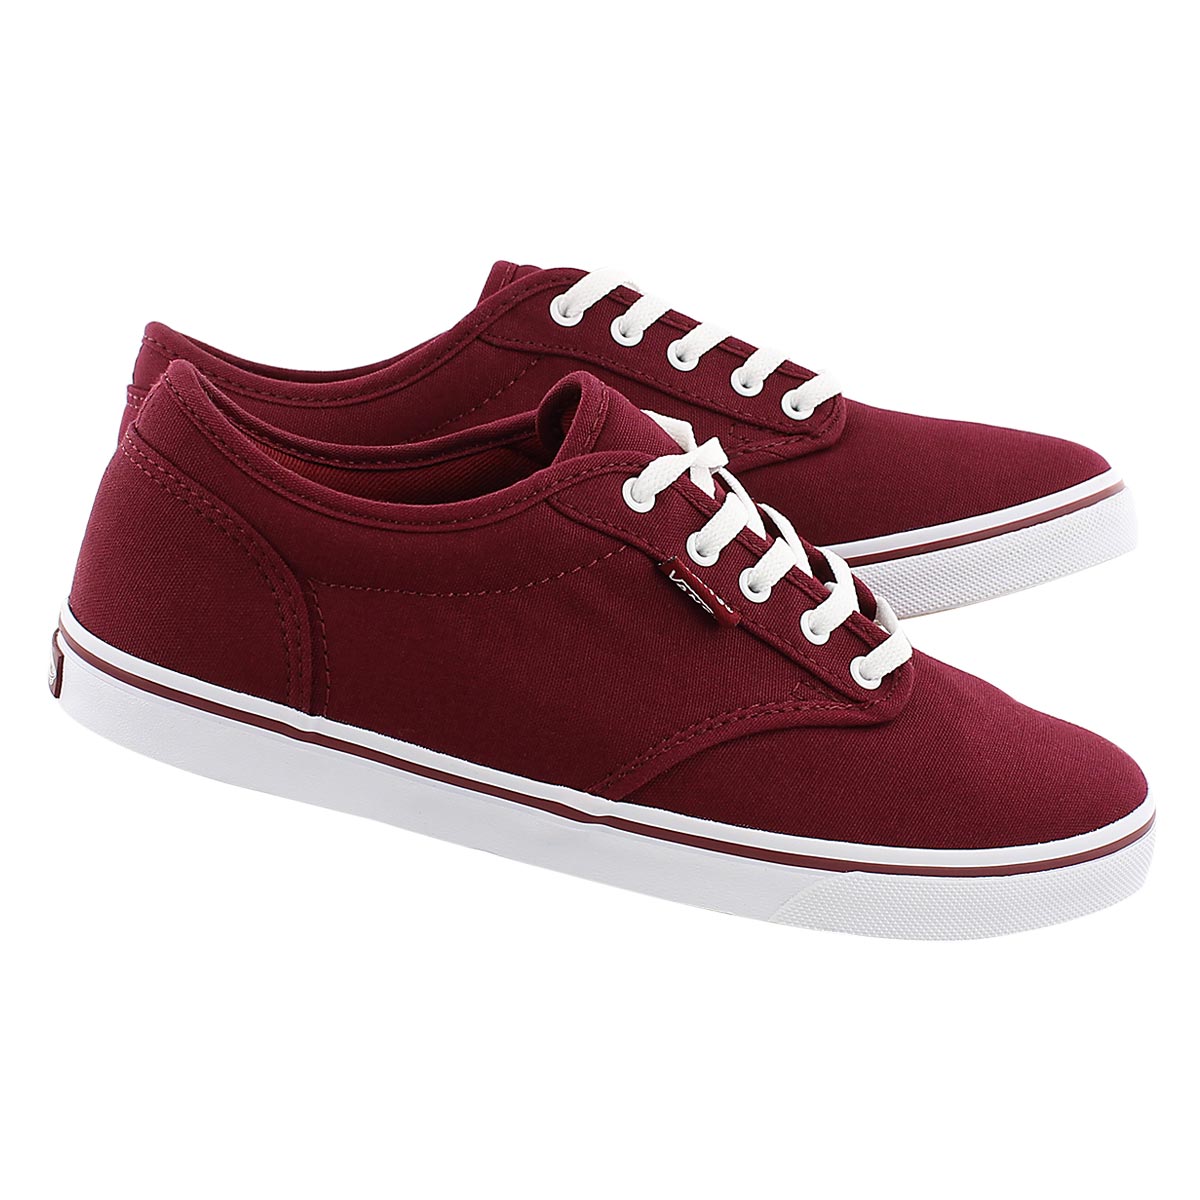 Vans Women's ATWOOD LOW burgundy lace up snea | Softmoc.com